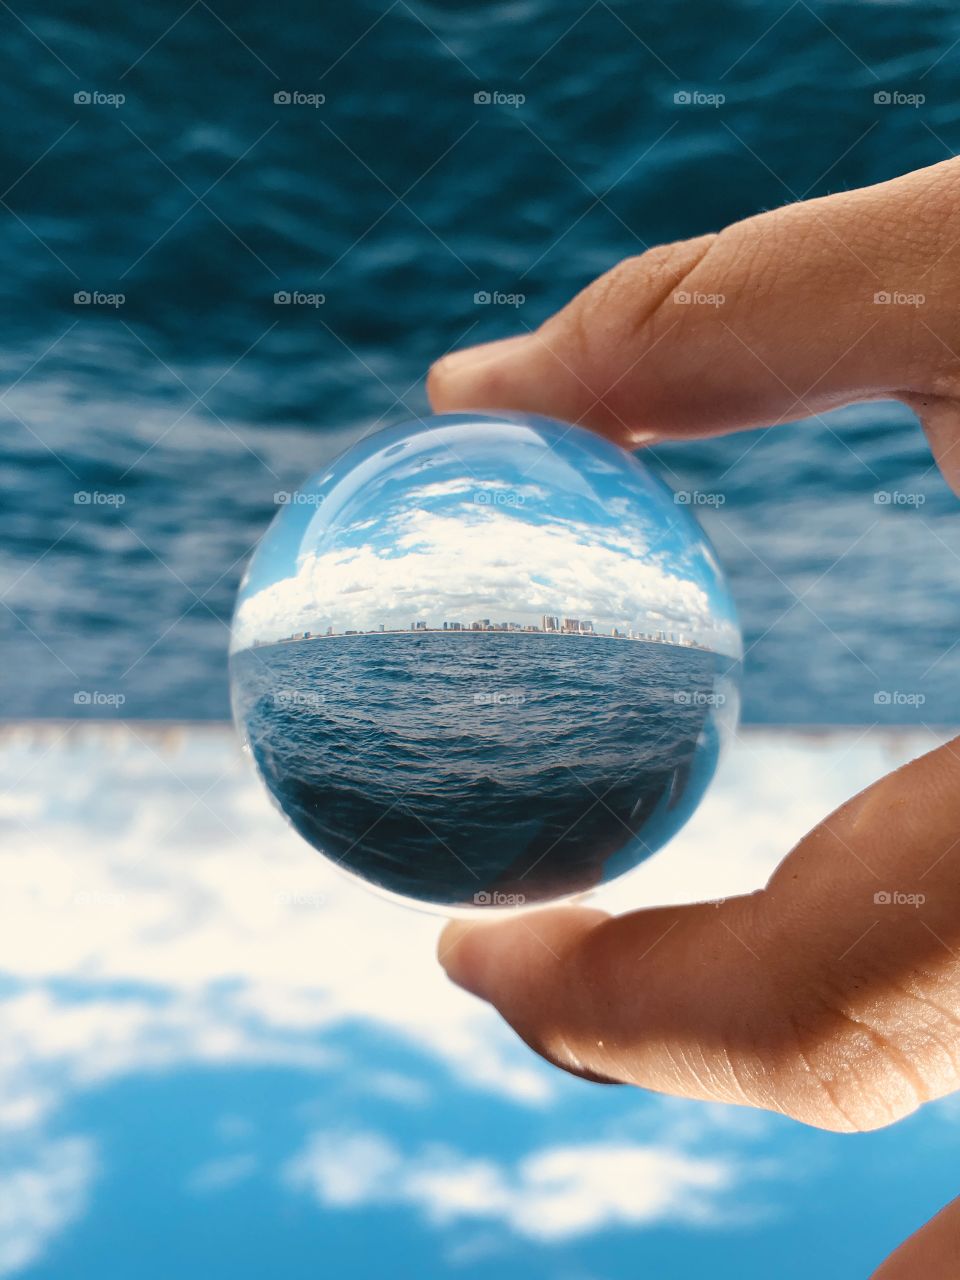 Sometimes all you need is a crystal ball.